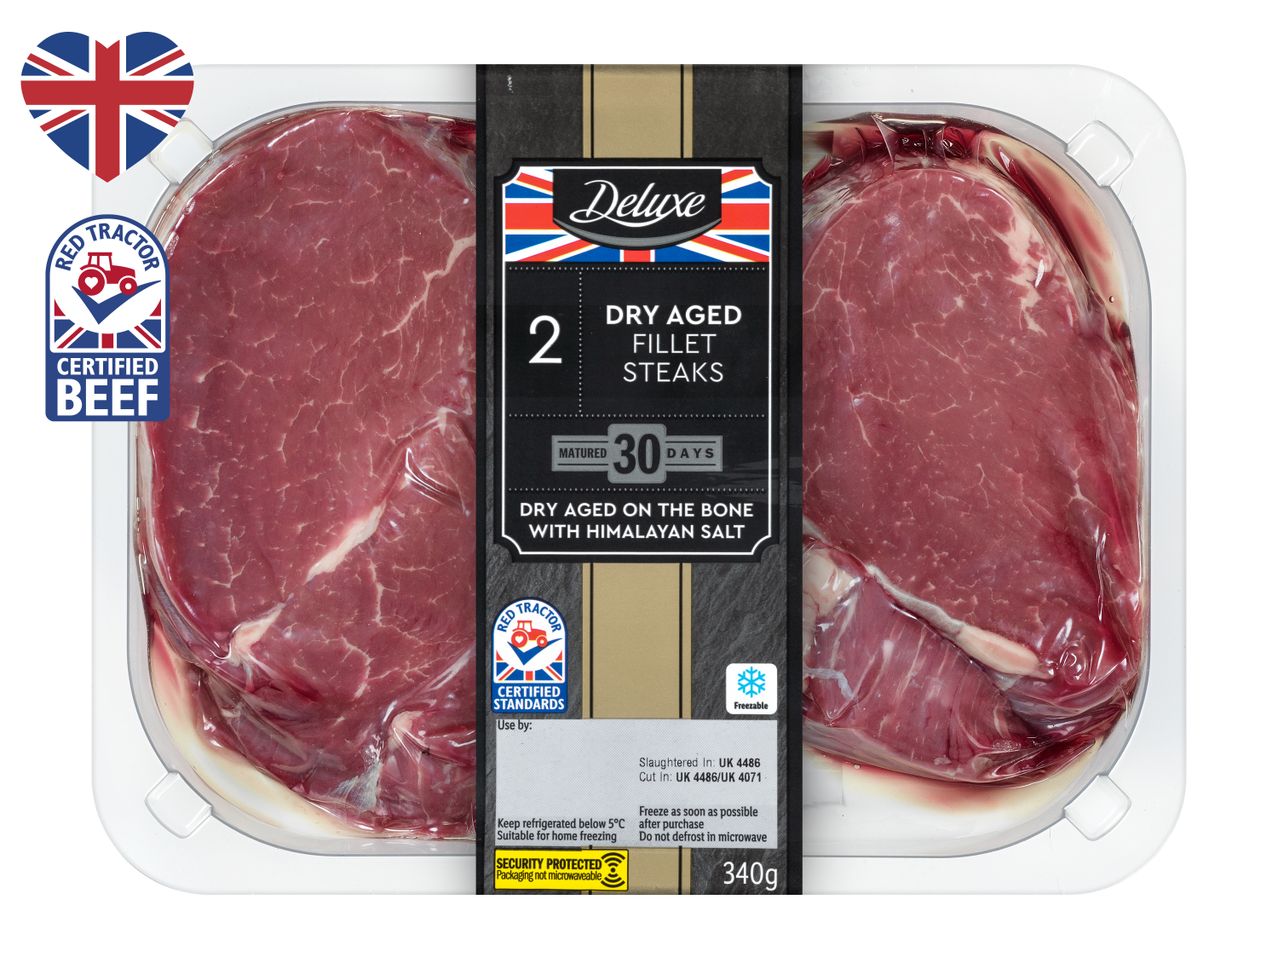 Go to full screen view: Deluxe 2 British Beef Fillet Steaks - Image 1